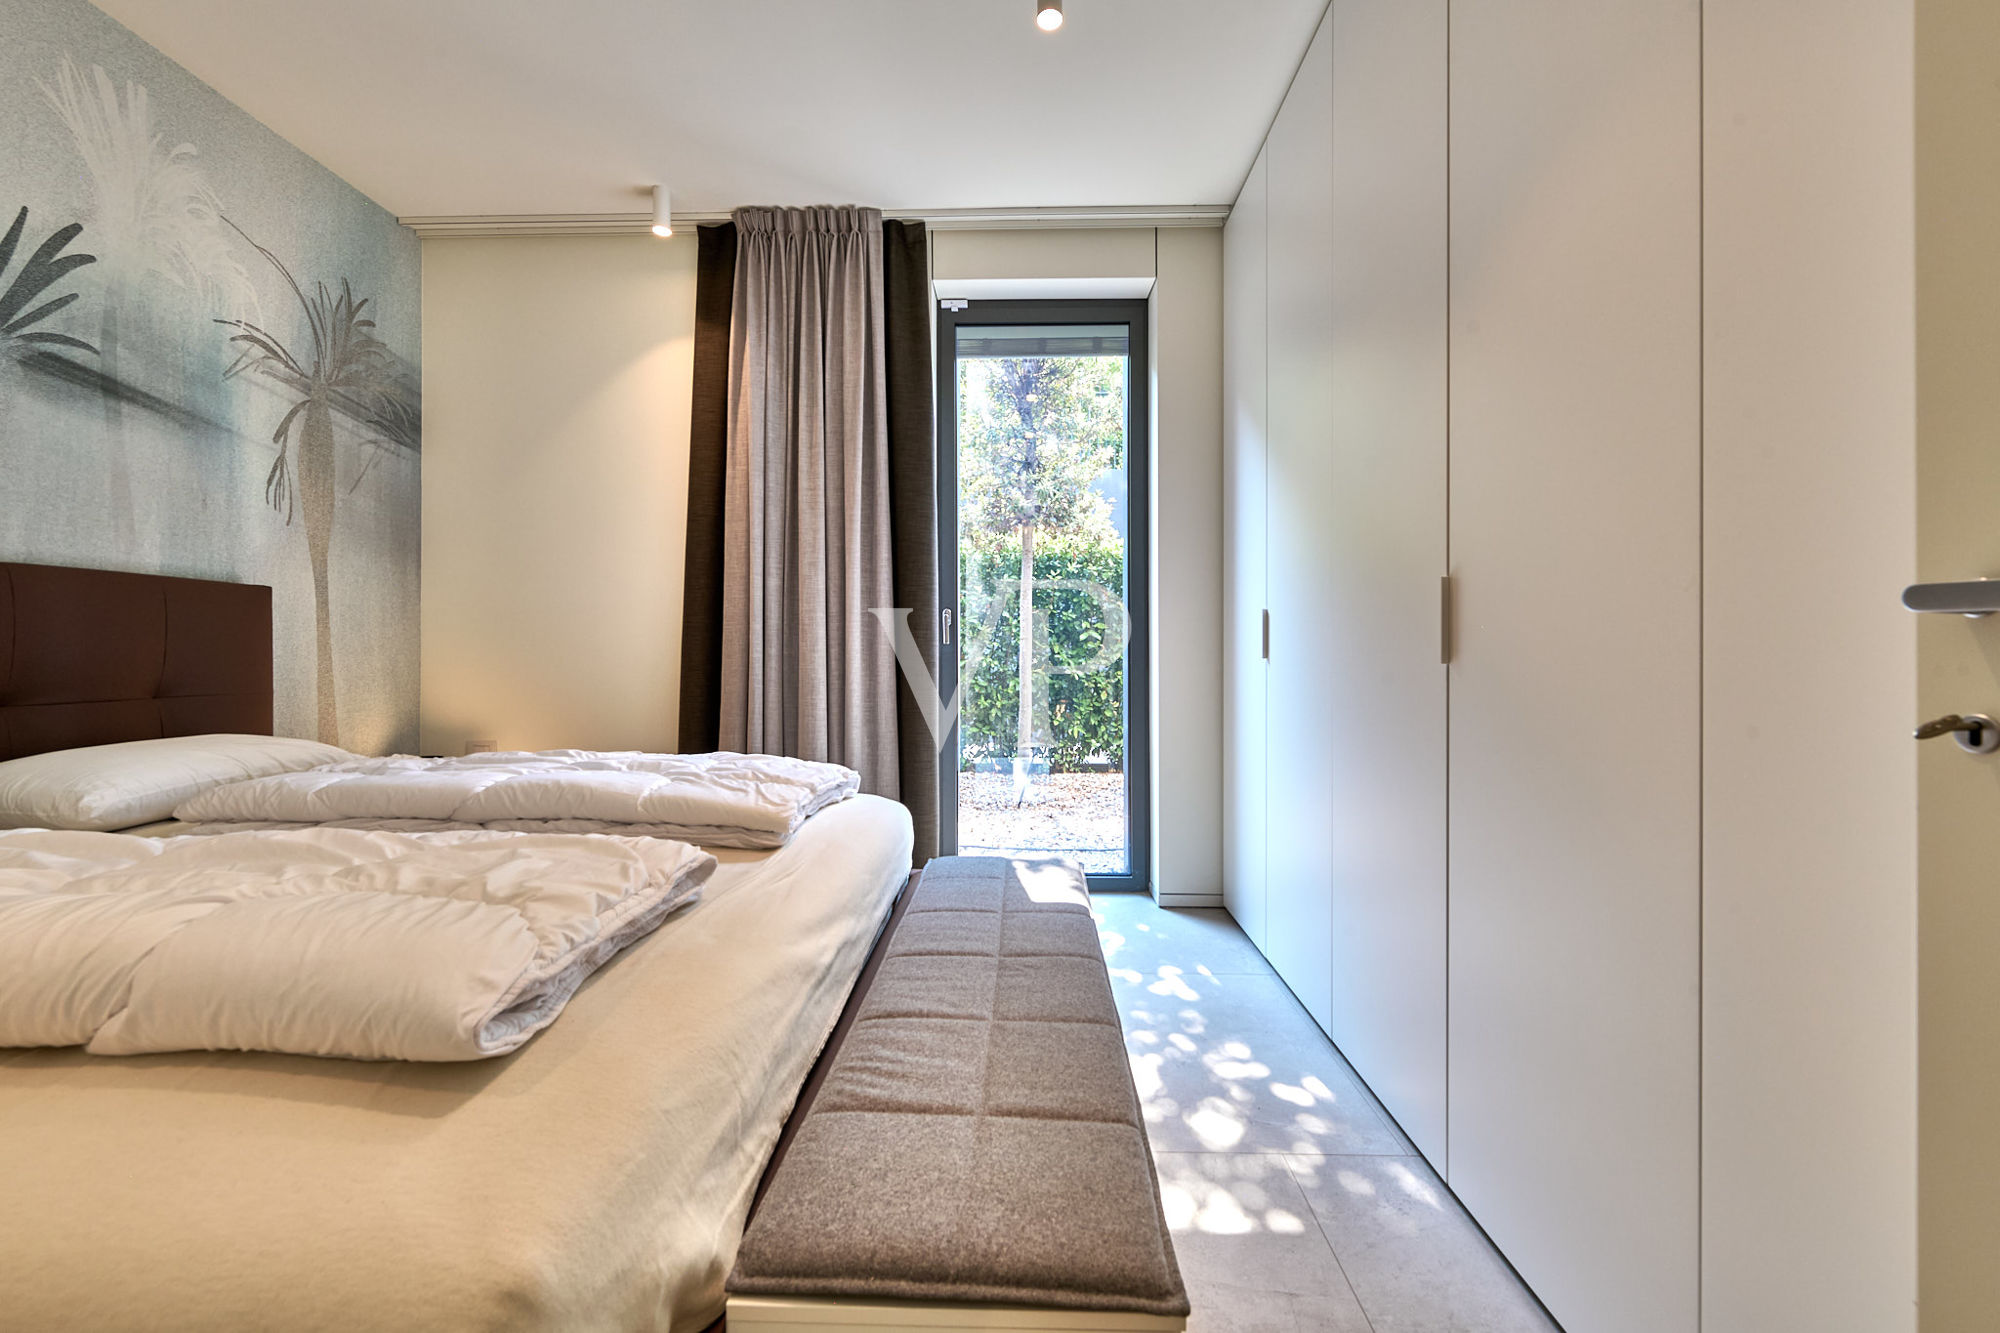 1 Master Bedroom with walk-in wardrobe, en Suite Bathroom and Access to the private Terrace